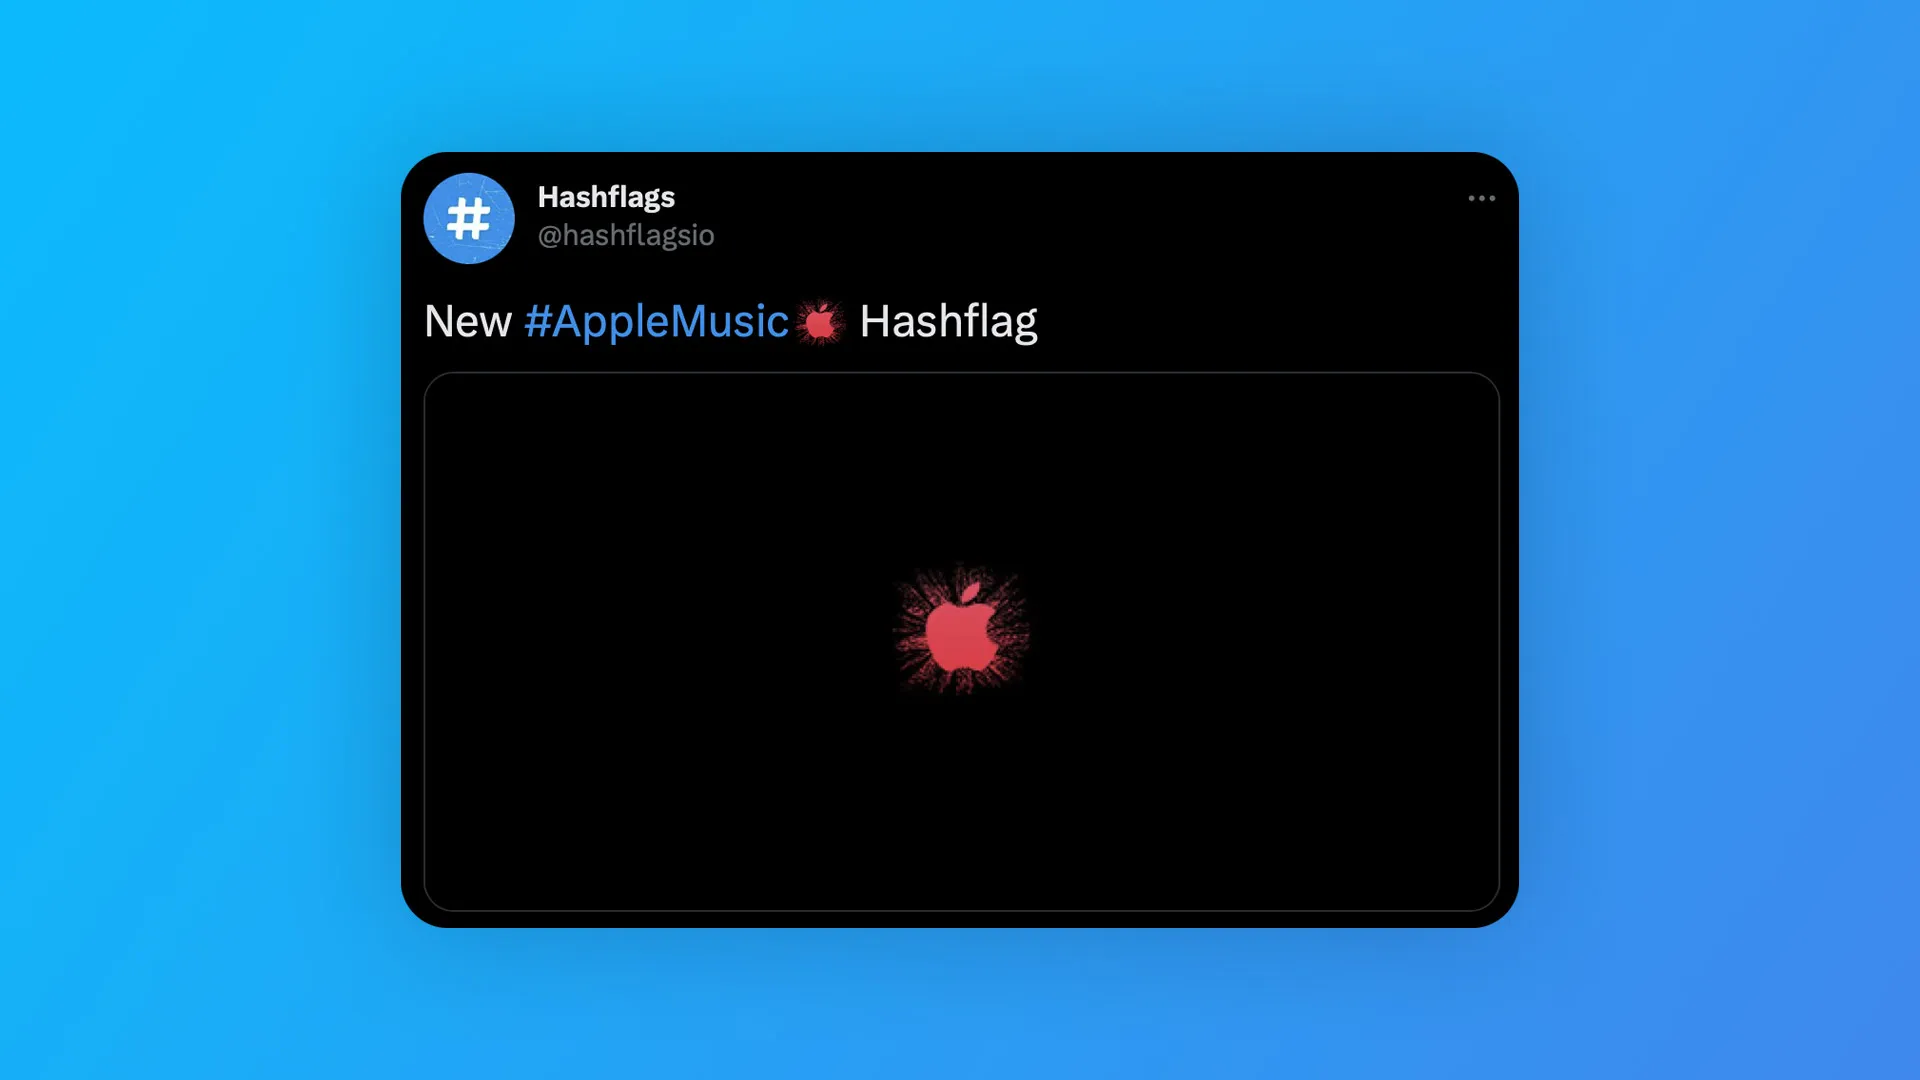 Have you seen the new Super Bowl #AppleMusic hashflag on Twitter